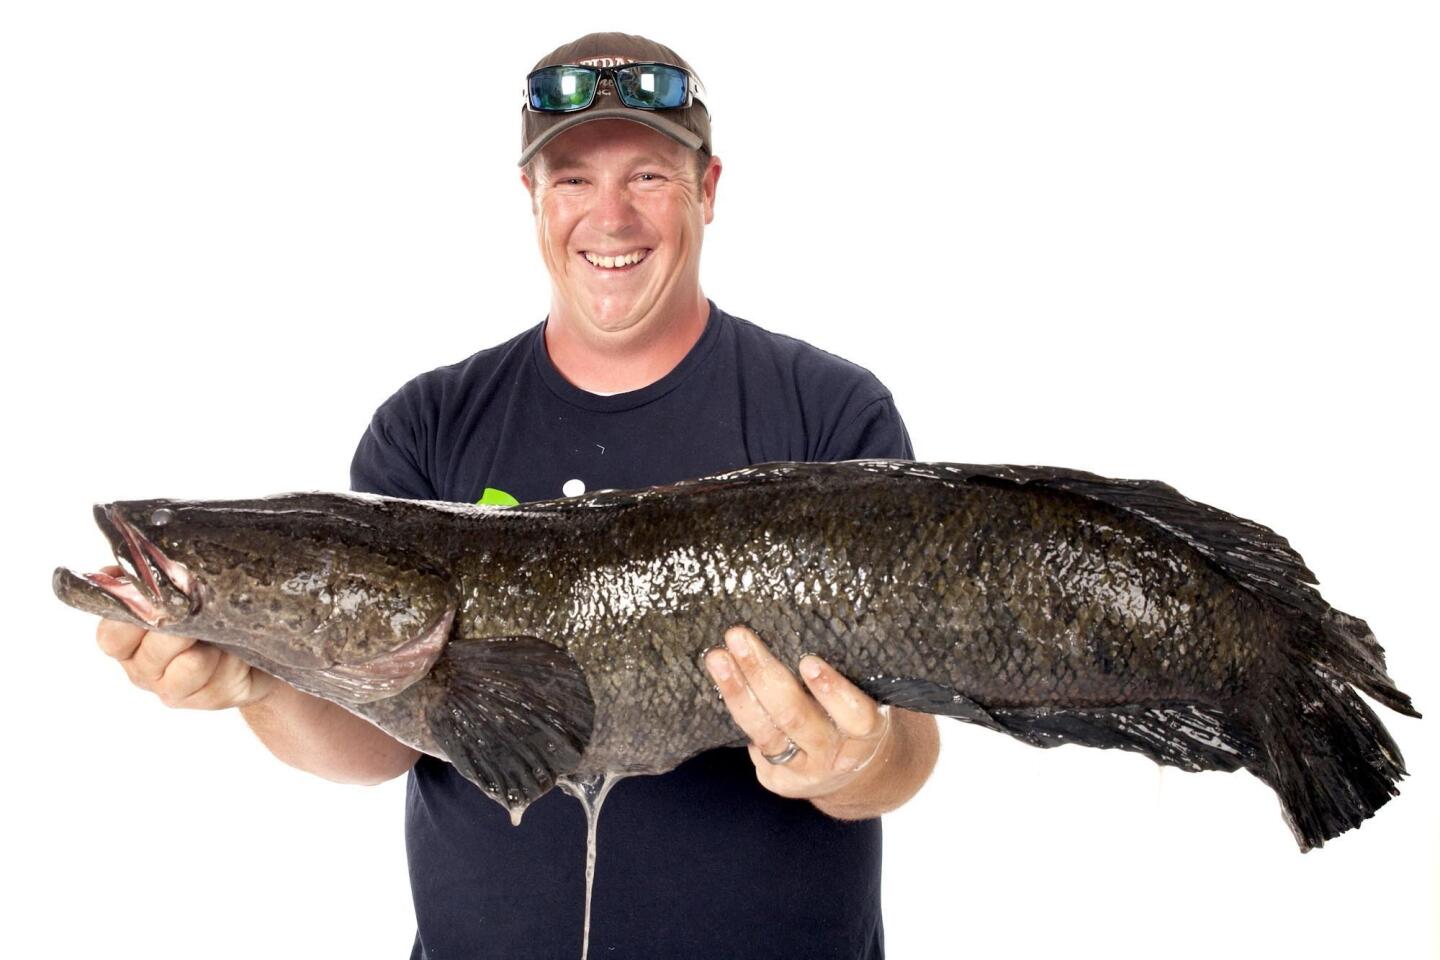 Caleb Newton poses with the 17-pound, 6-ounce northern snakehead fish he caught in Aquia Creek this summer.